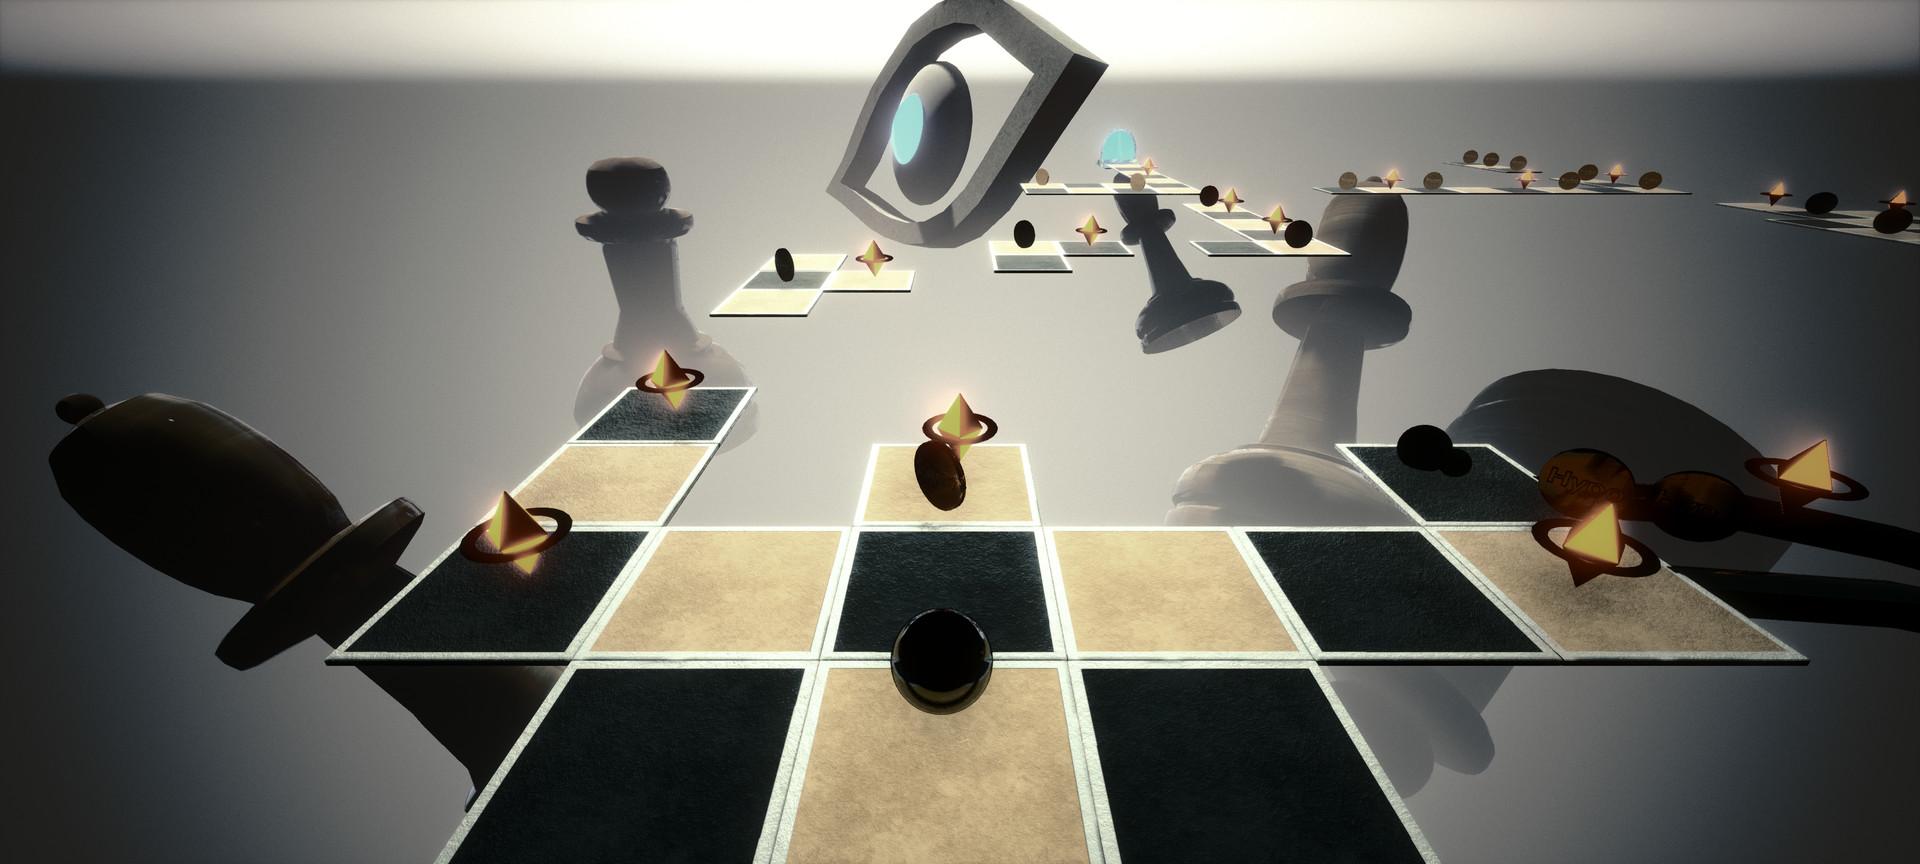 Screenshot №38 from game Hyposphere